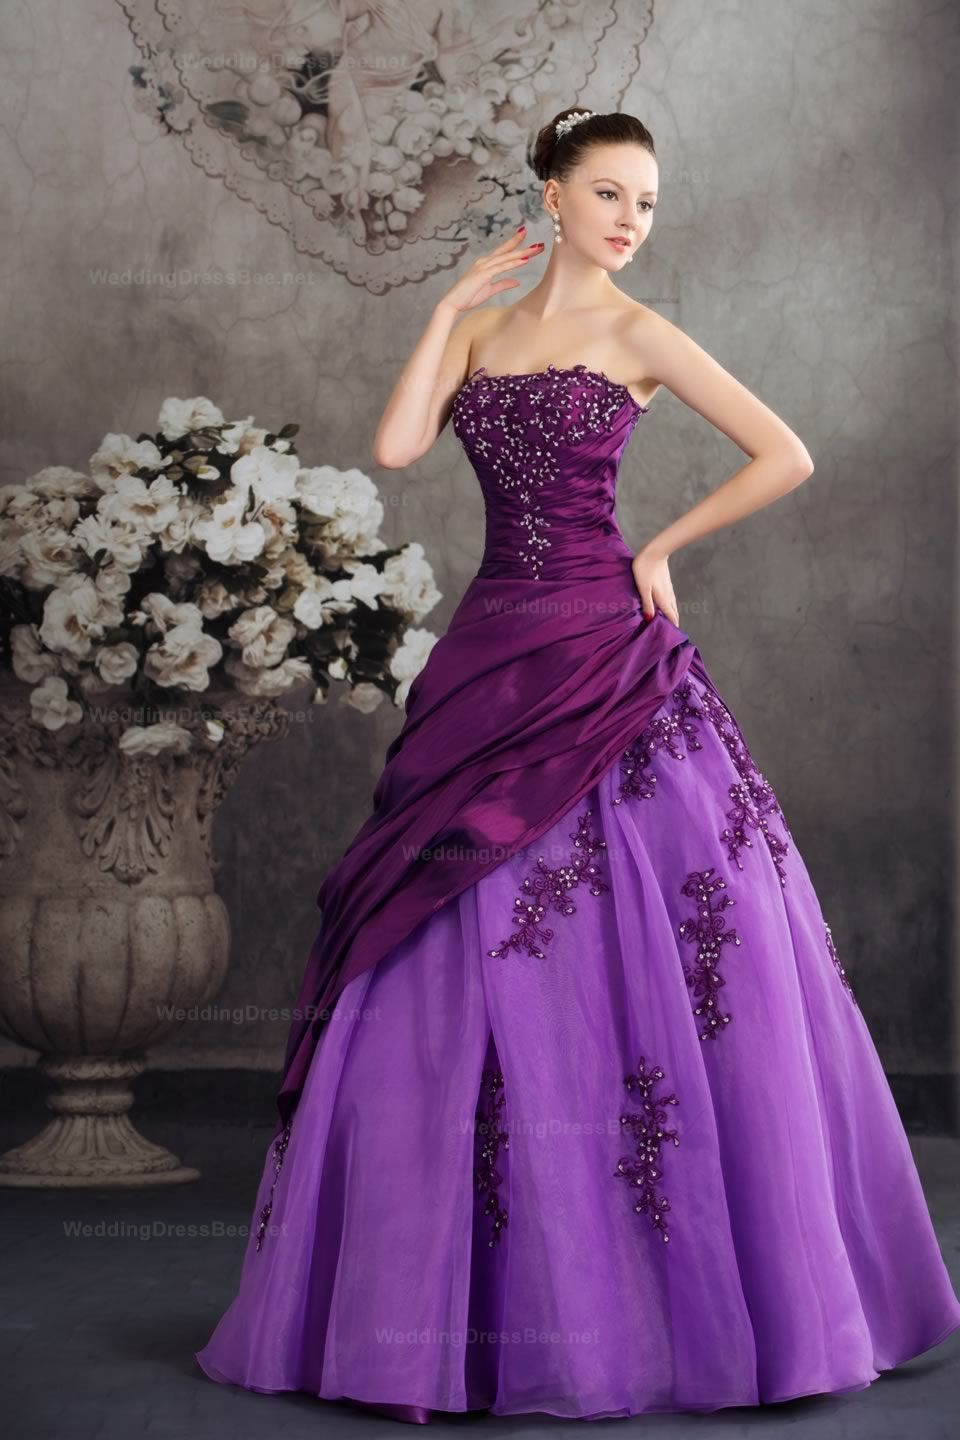 Fantastic Lace Appliques Detailed Taffeta Over Organza Ball Gown Dress